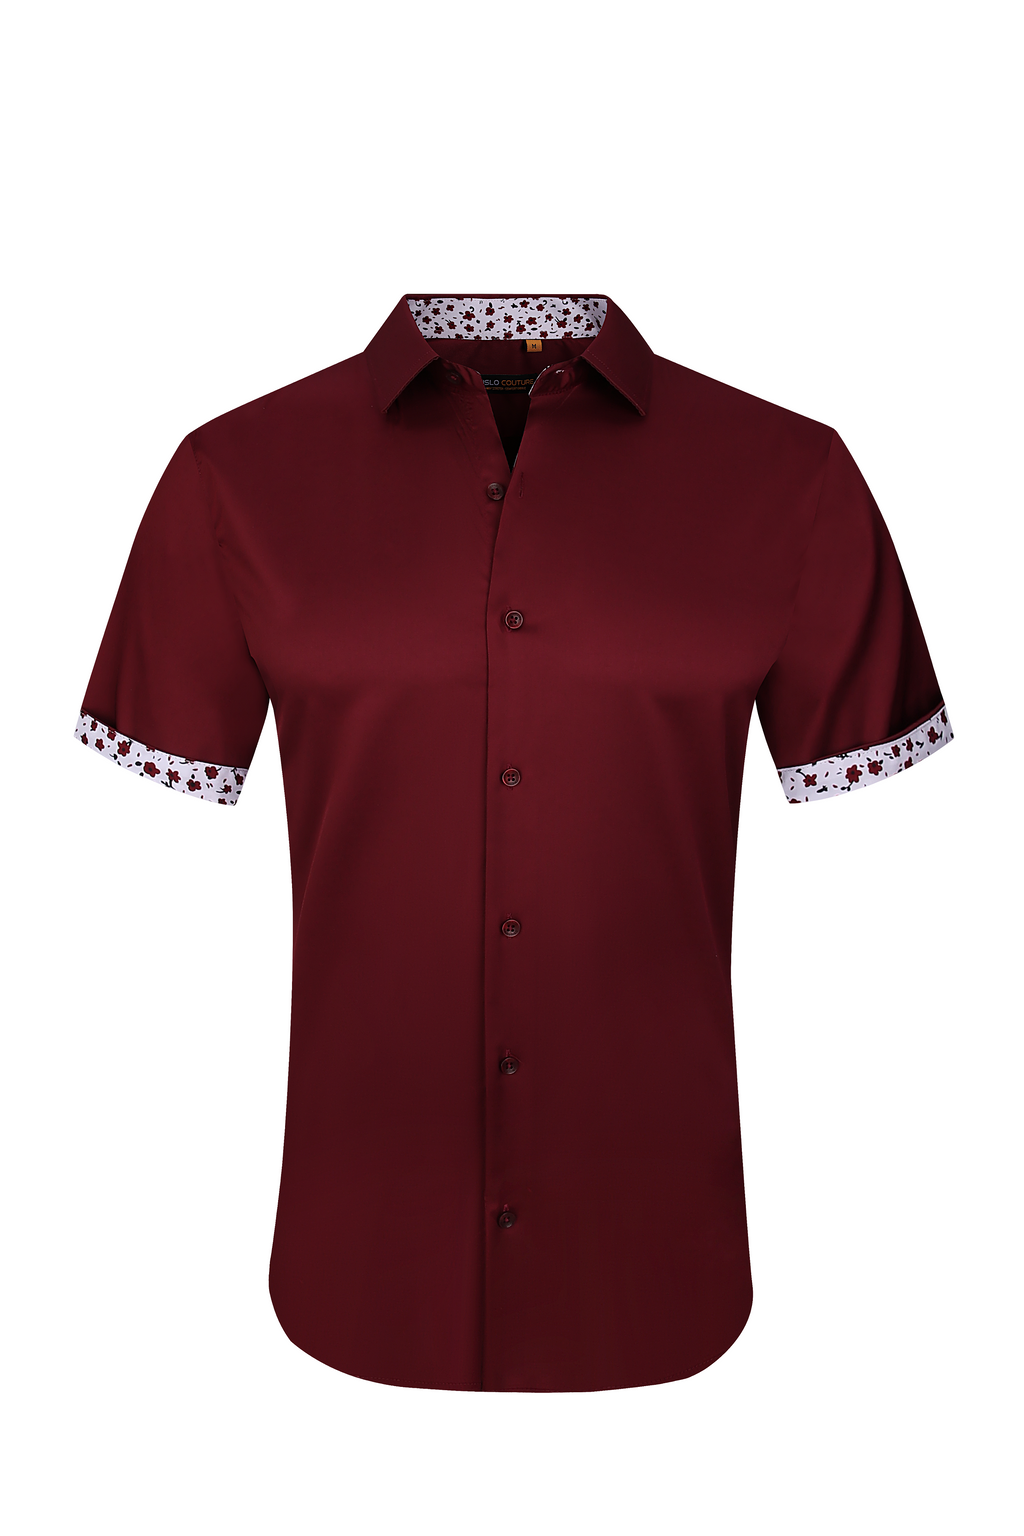 Suslo Solid 4 Way Stretch Short Sleeve Shirt - Burgundy – Suslo Couture